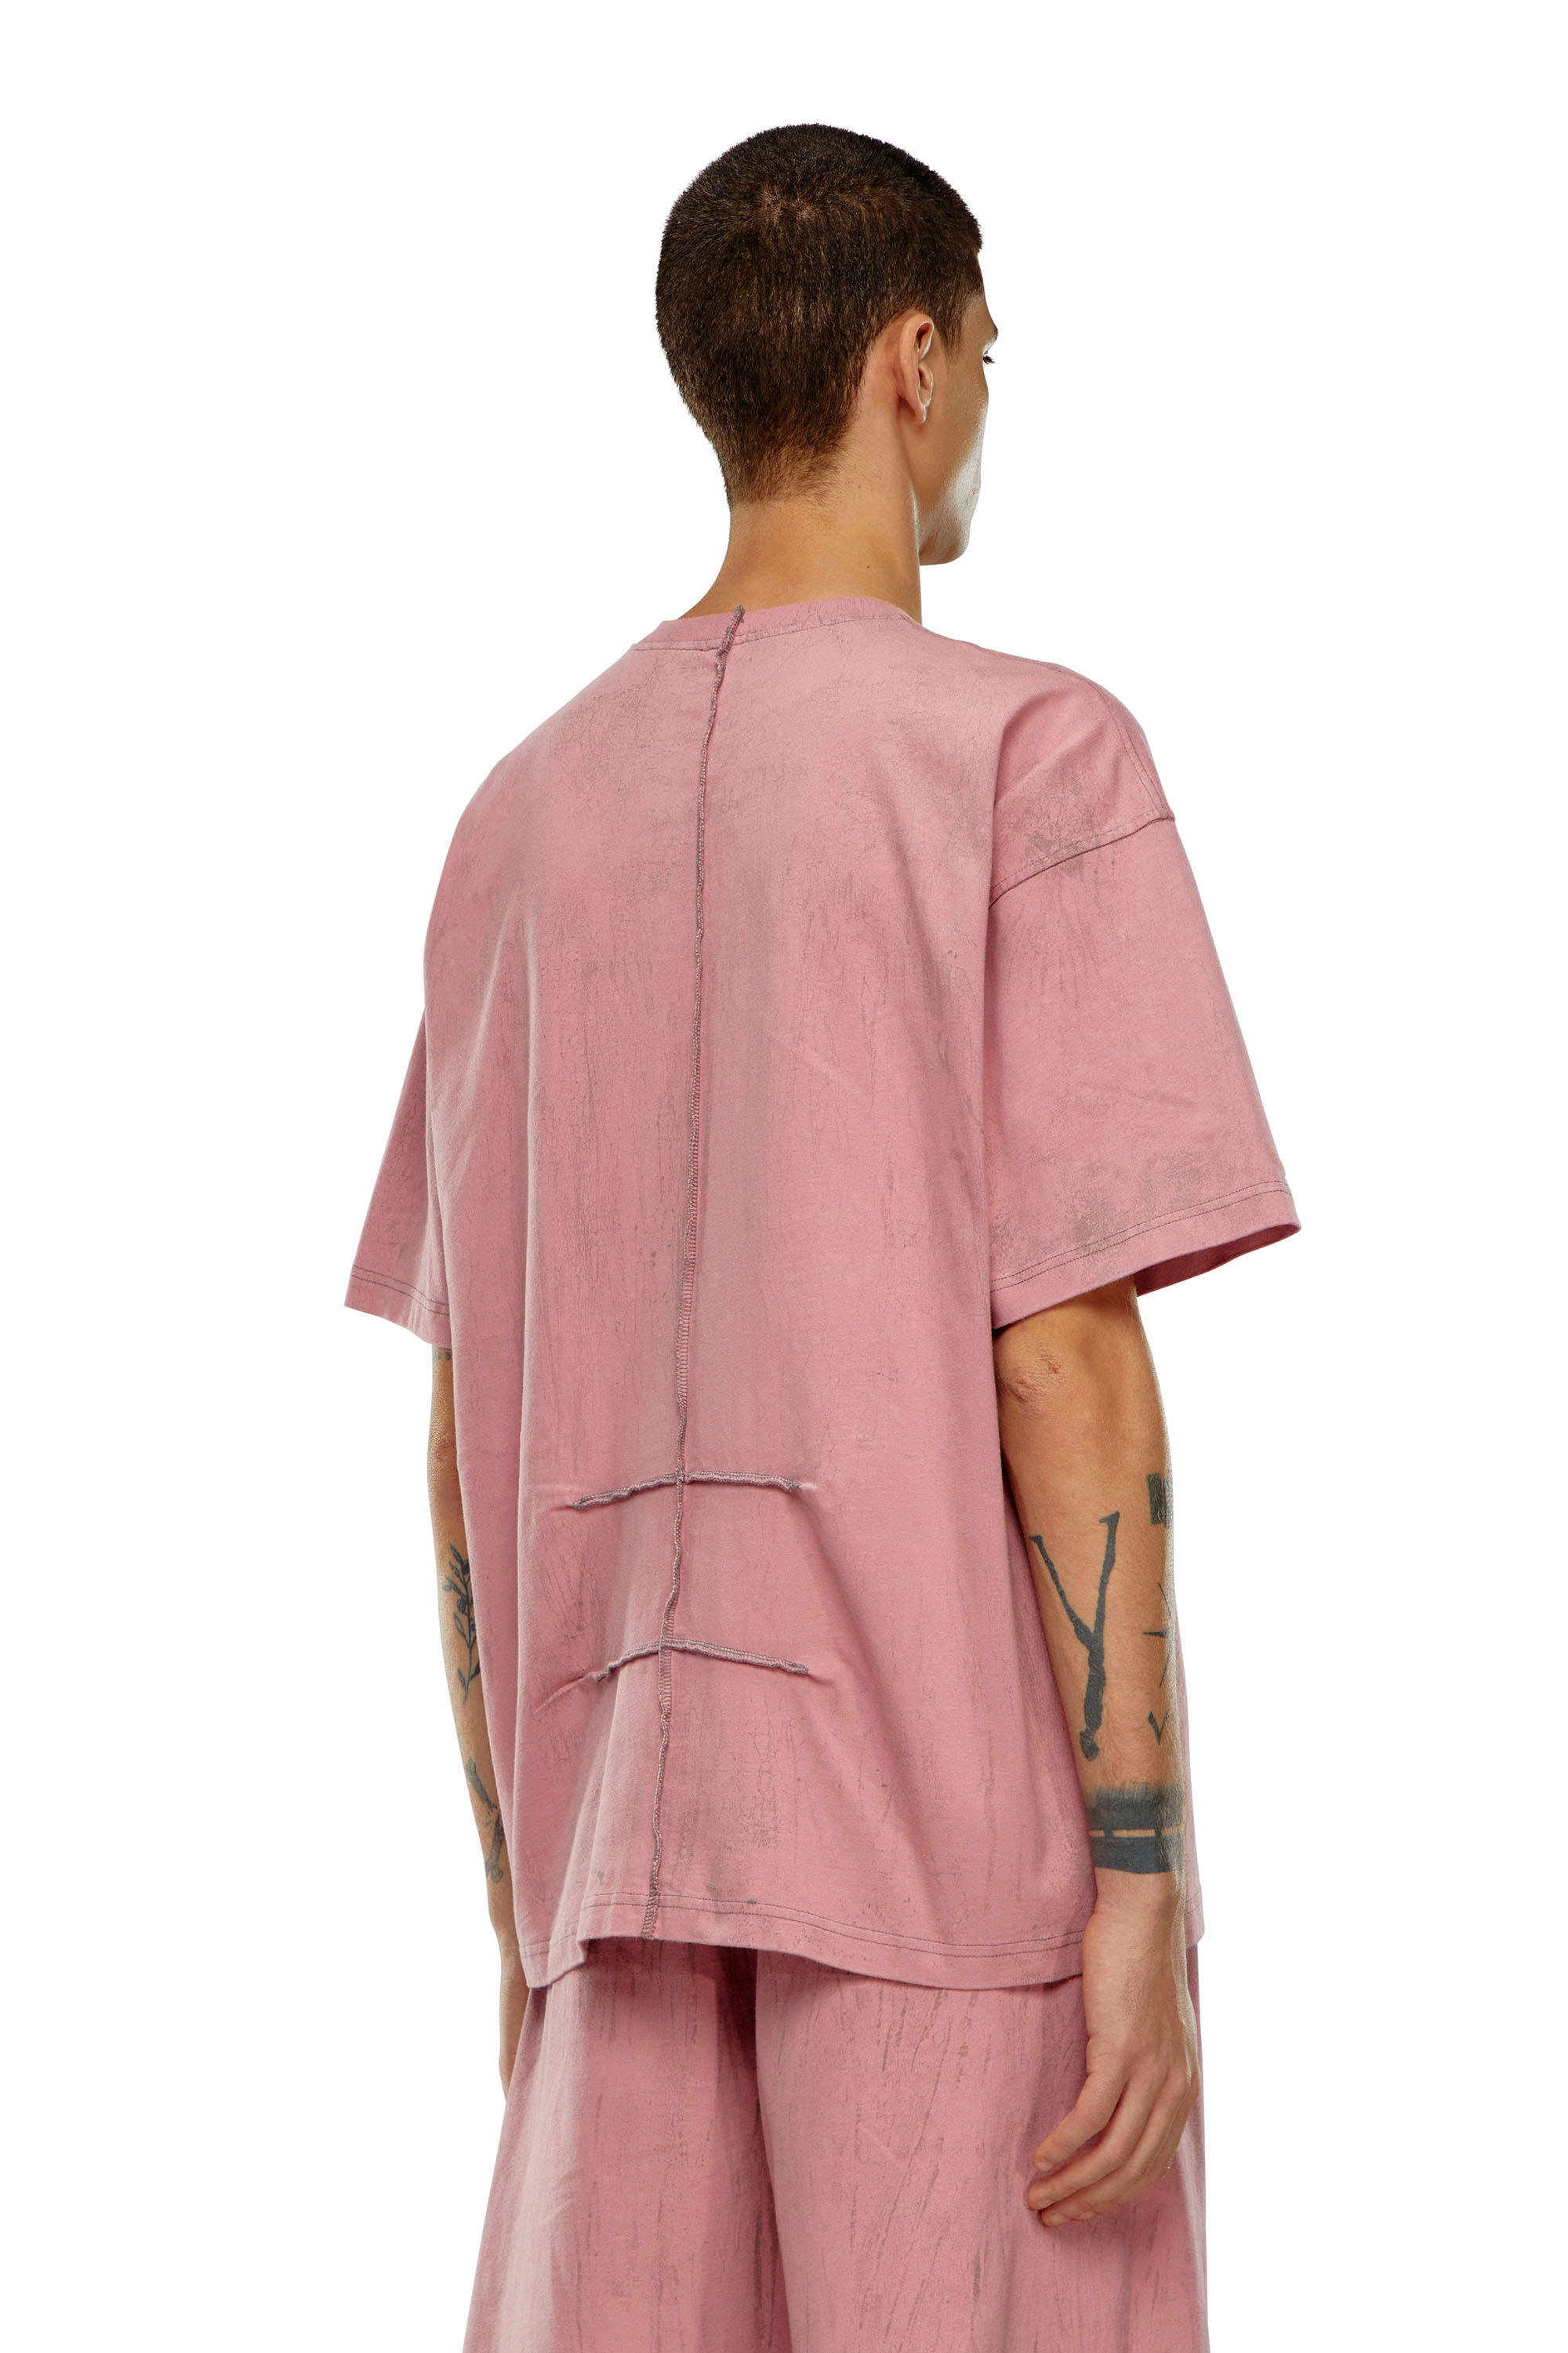 Diesel - T-COS, Man T-shirt in plaster effect jersey in Pink - Image 4